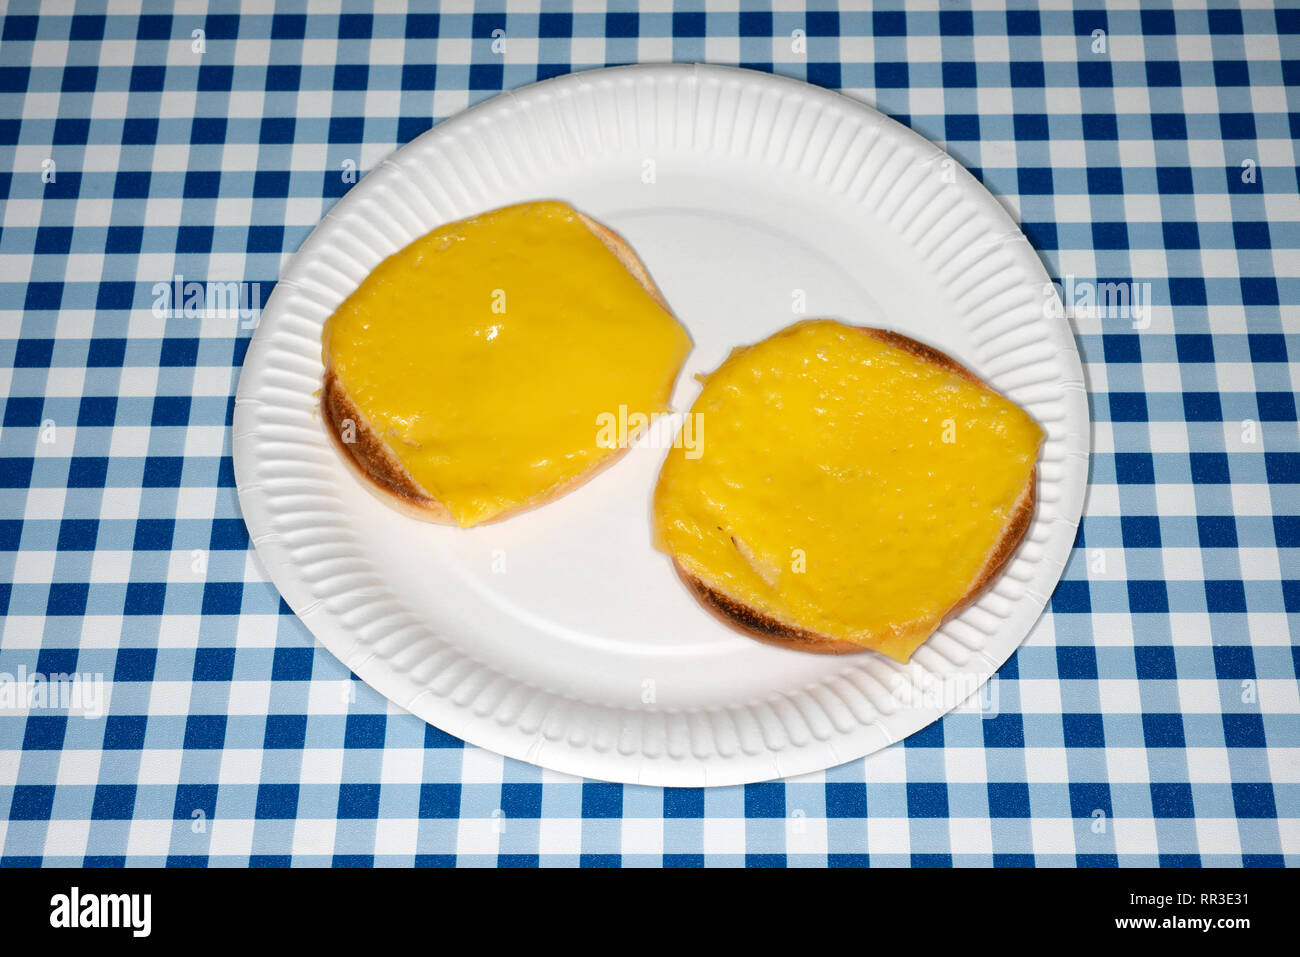 Violife dairy free slices toasted on a bread roll Stock Photo